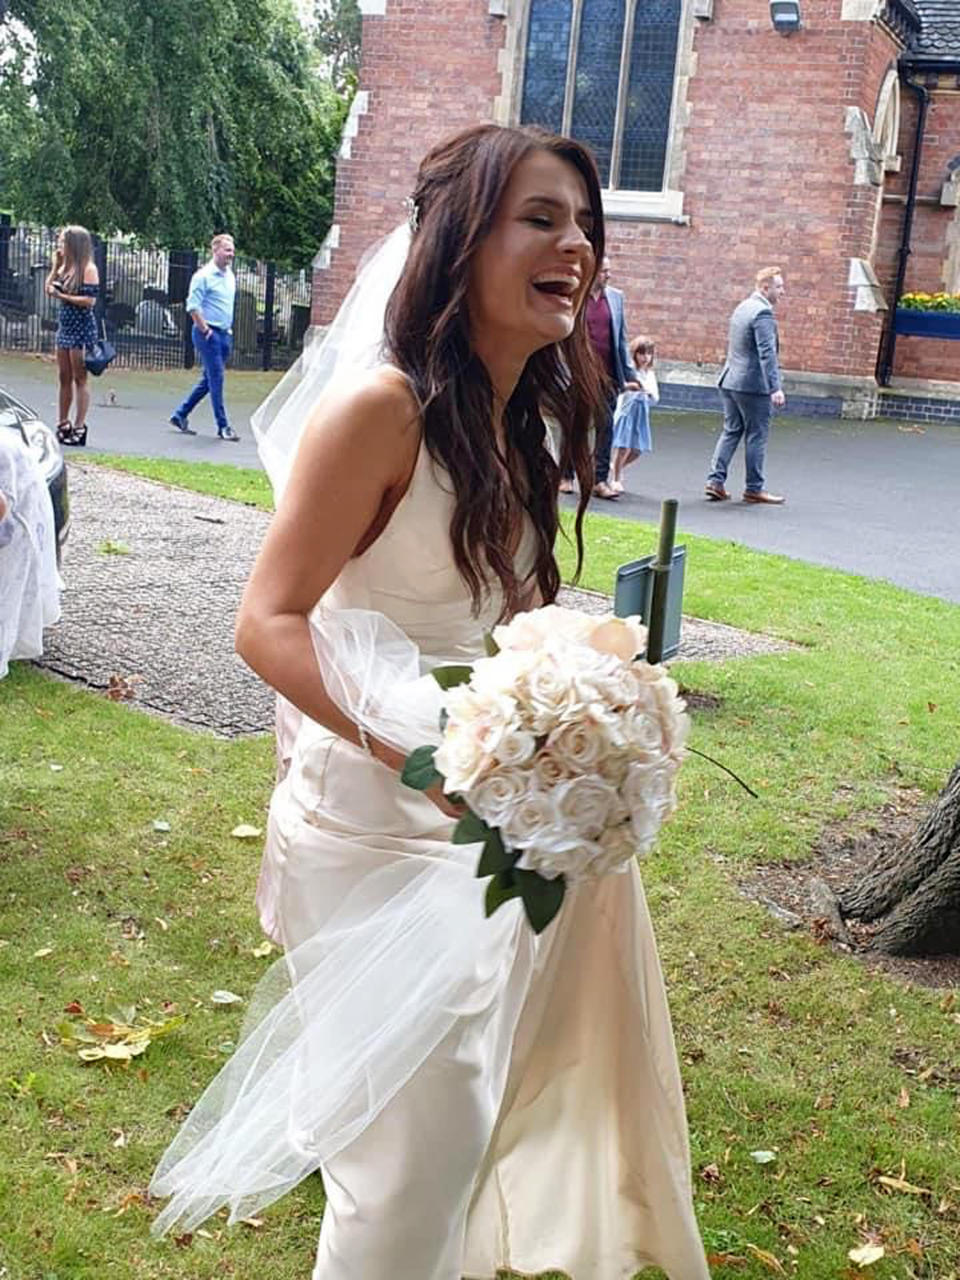 The bride bought her dress on ASOS and made her bouquet. (Caters)